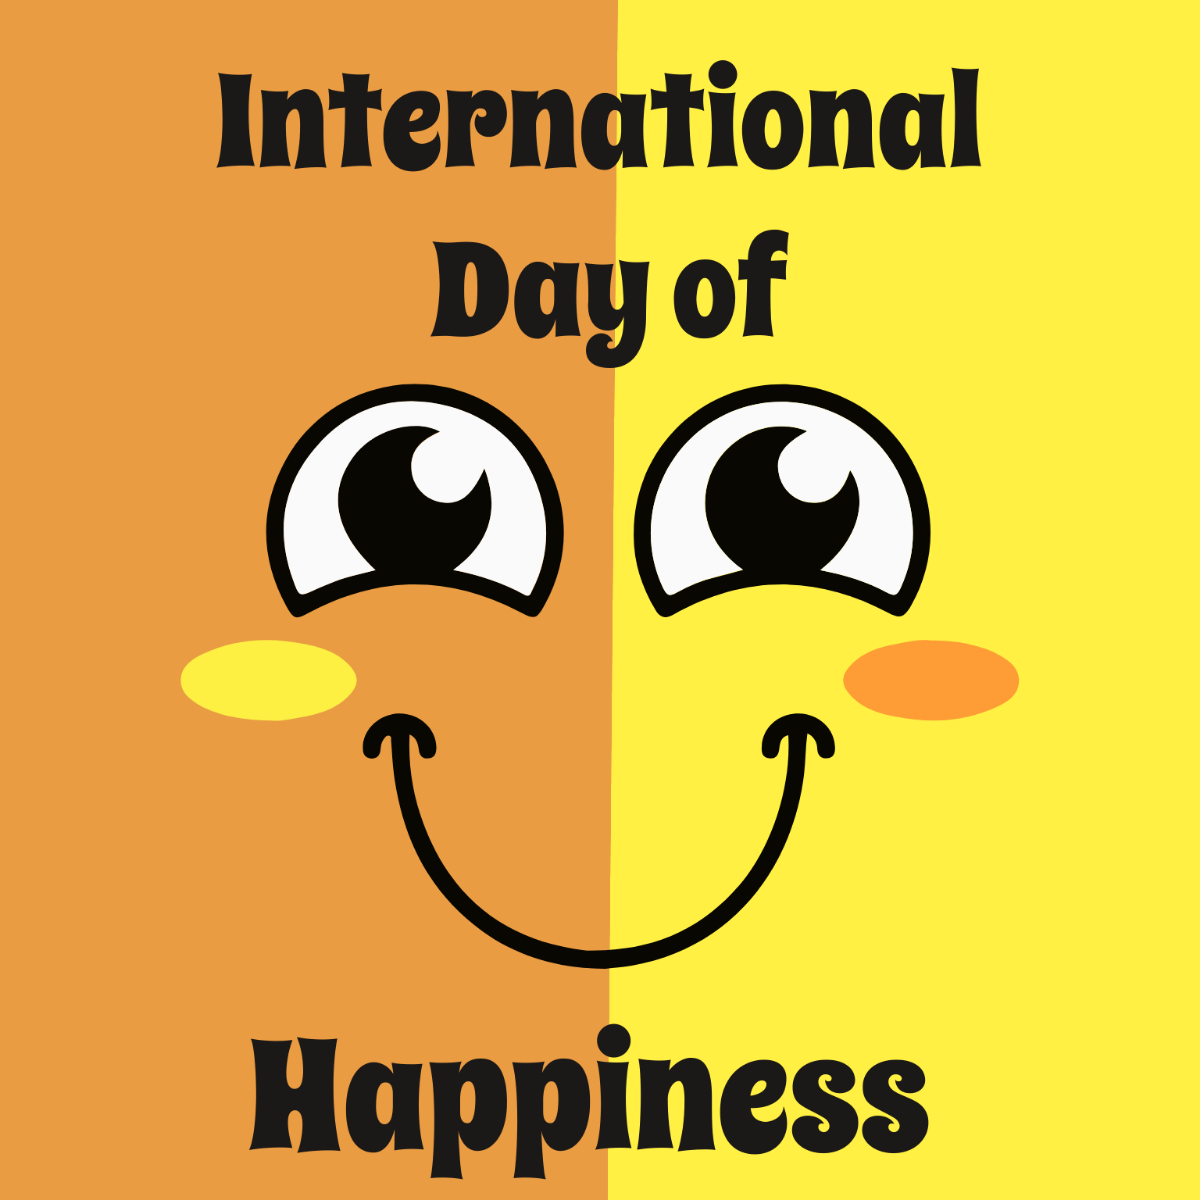 International Day of Happiness Illustration Template